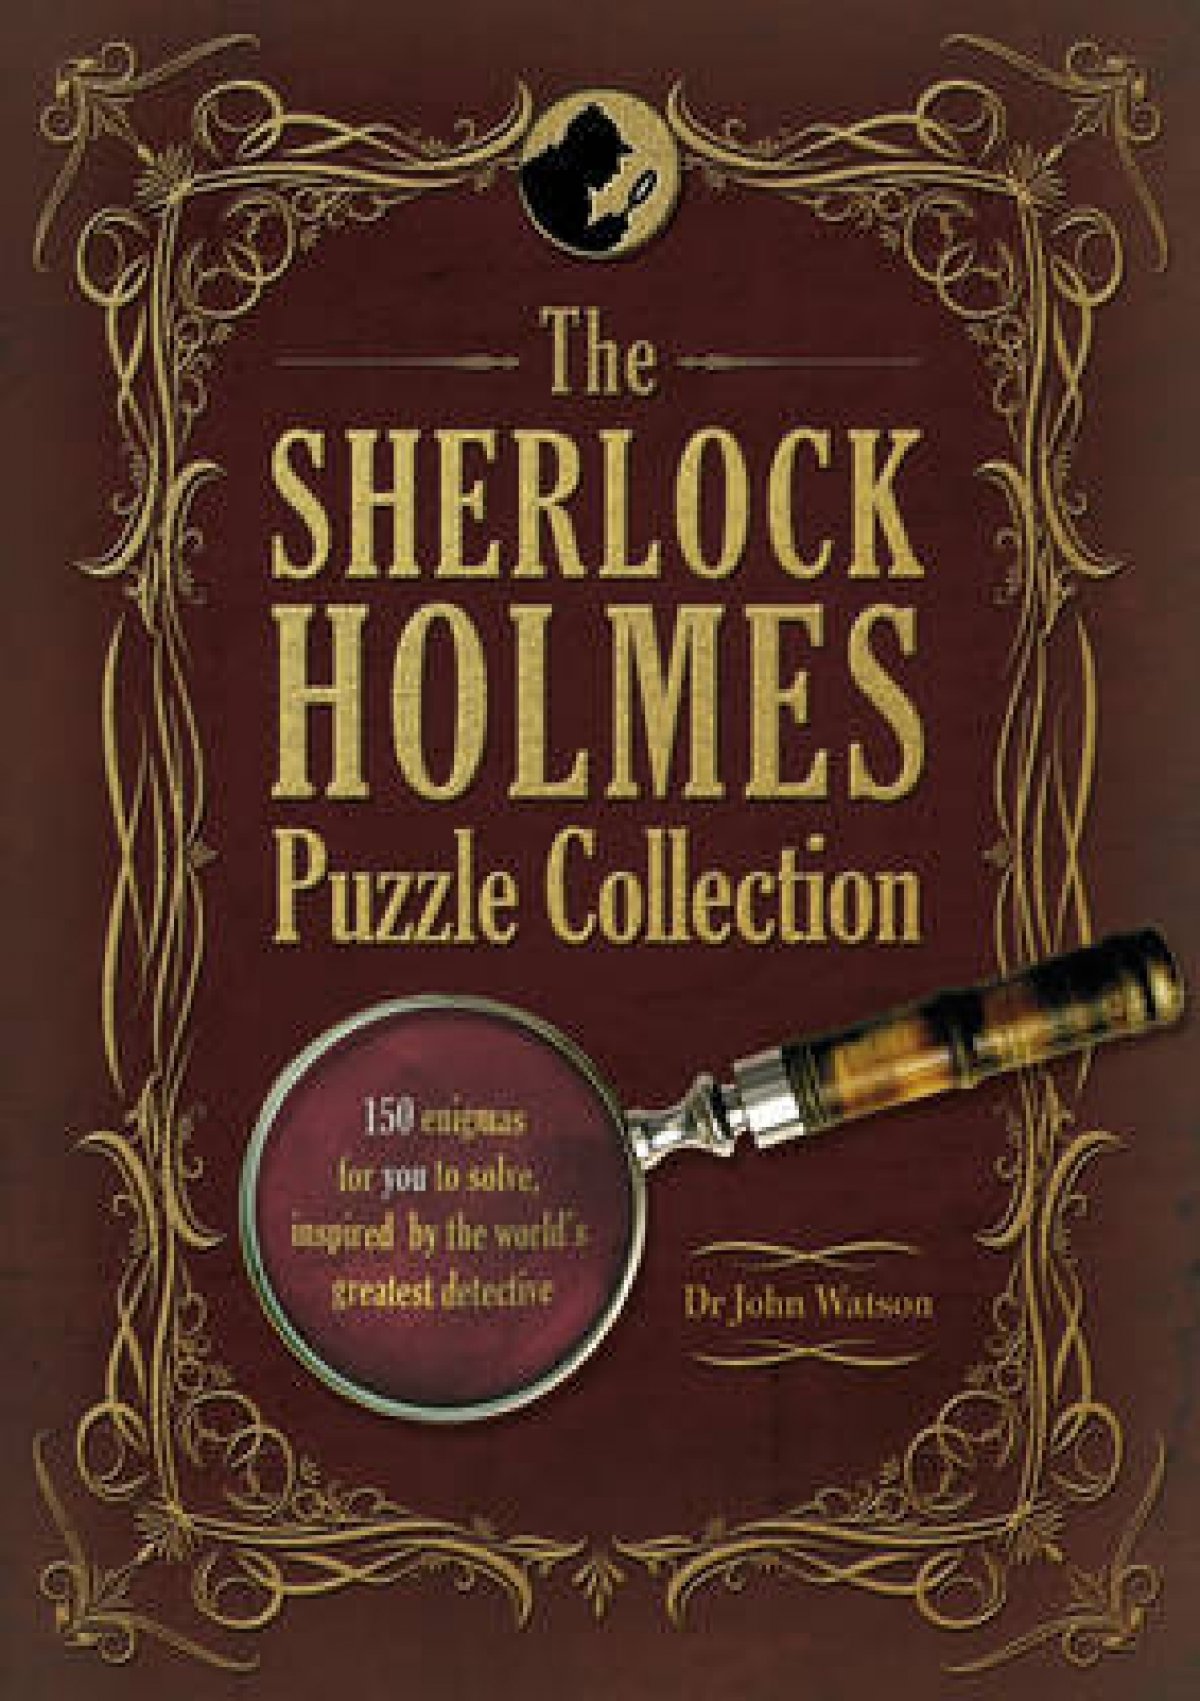 PDF) The Sherlock Holmes Puzzle Collection: 150 enigmas for you to